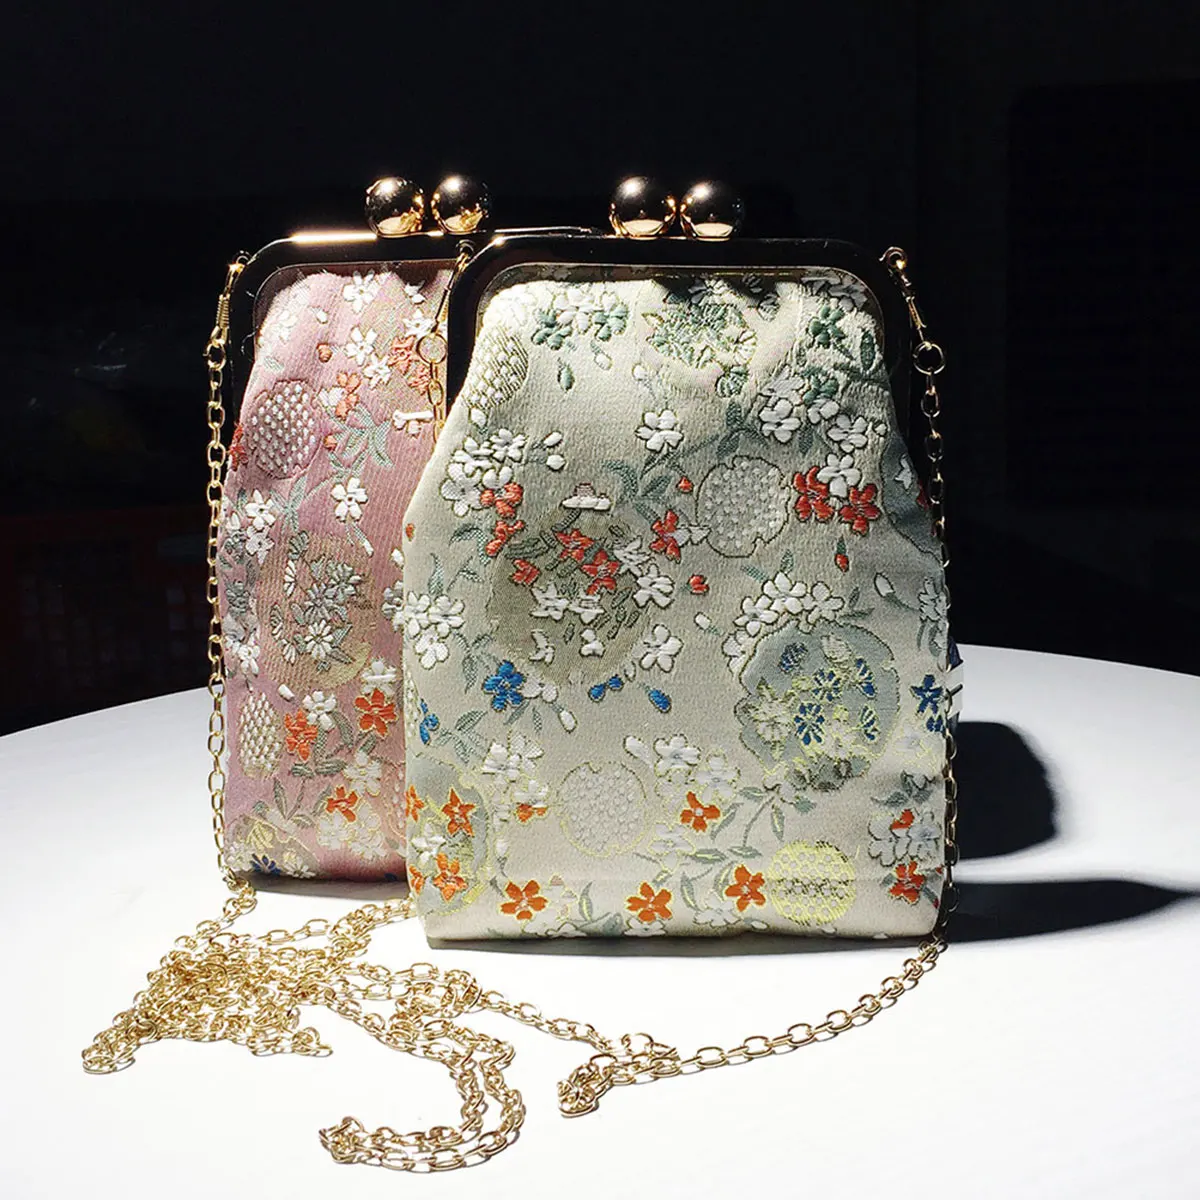 Han Chinese Clothing and Bags Ancient Style Socialite Cheongsam Chinese Style Embroidery Women's Bag Chain Crossbody Small